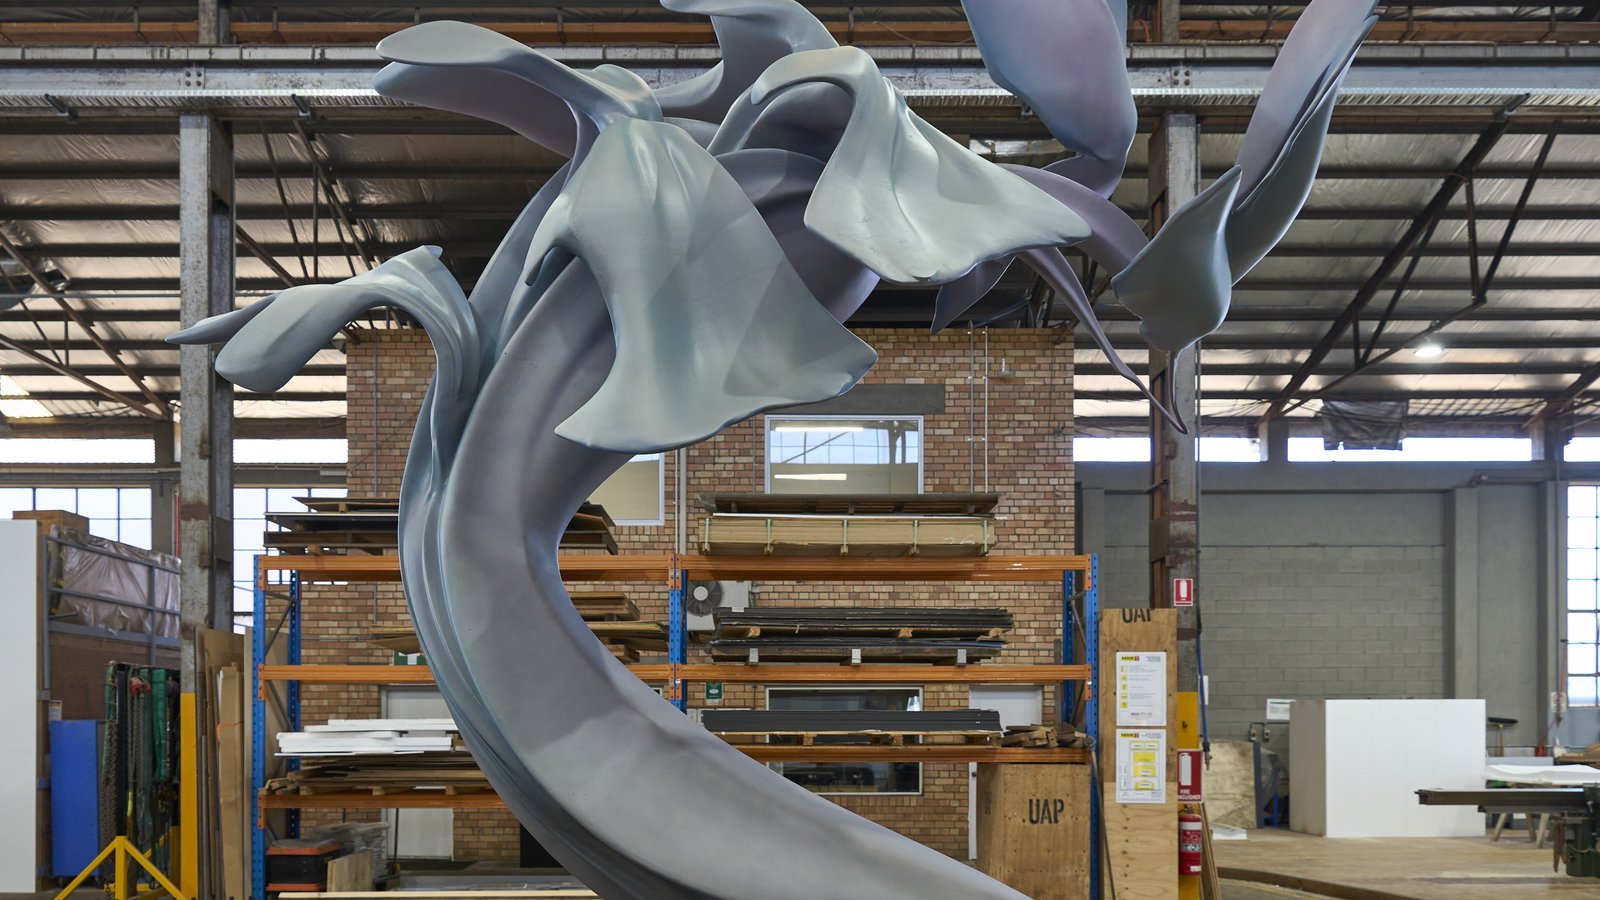 Marguerite Humeau, Leeuwin, 20223,5 m H × 2 m W × 3,75 m LCast Aluminium (100% recycled and resourced)Installation view at the UAP workshop, Brisbane